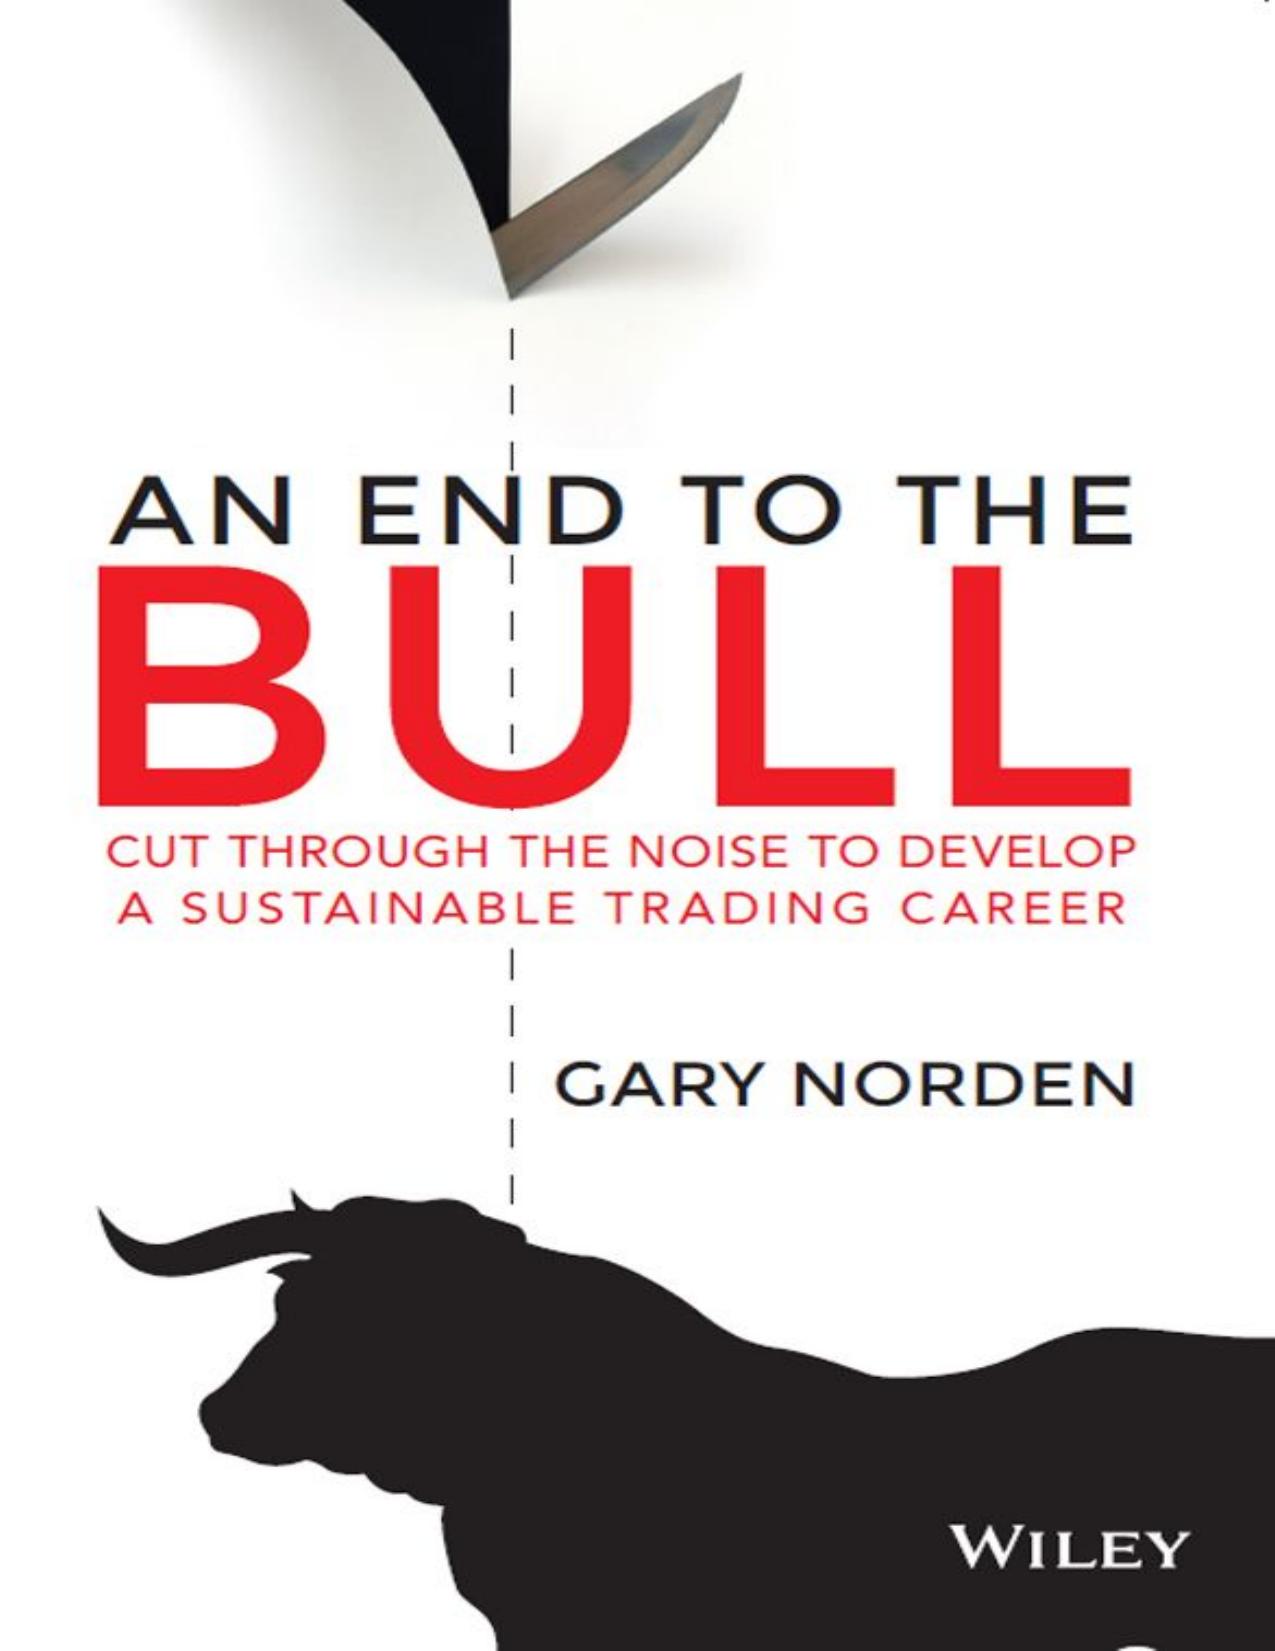 End to the Bull_ Cut Through the Noise to Develop a Sustainable Trading Career, An - Gary Norden.jpg